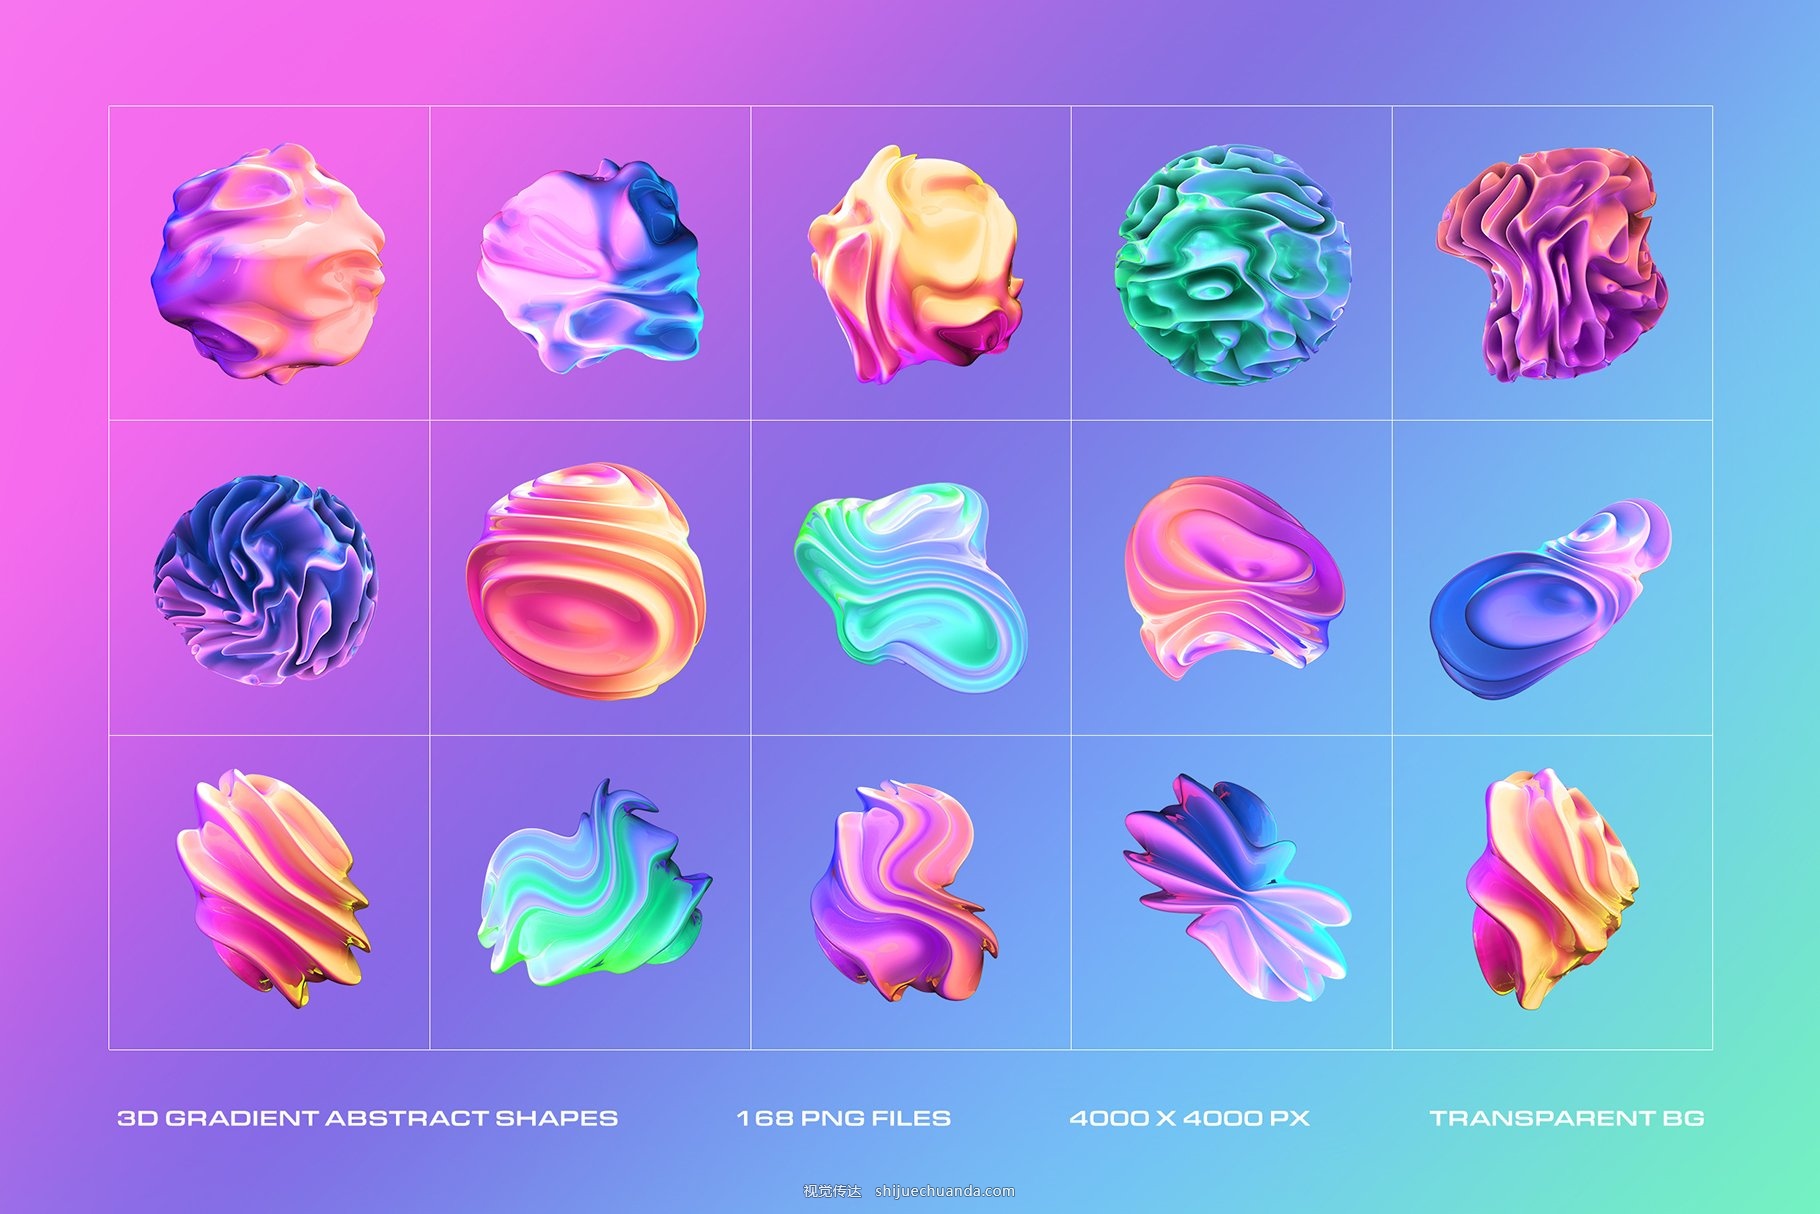 3D Gradient Abstract Shapes-3.jpg